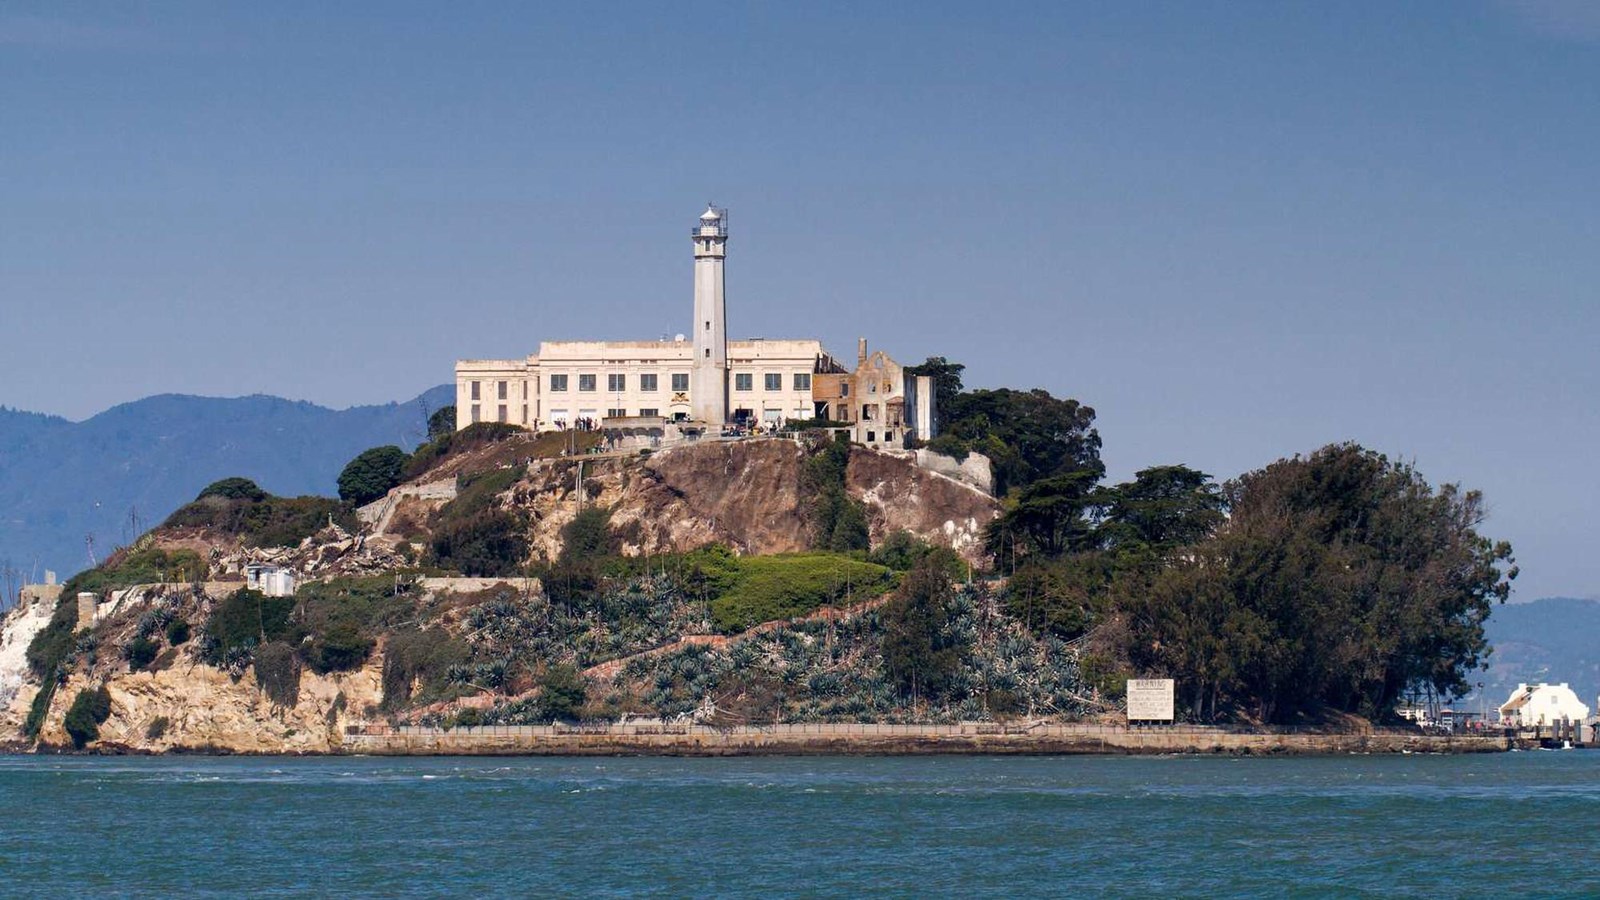 The lighthouse and prison can be seen on Alcatraz island from the water.